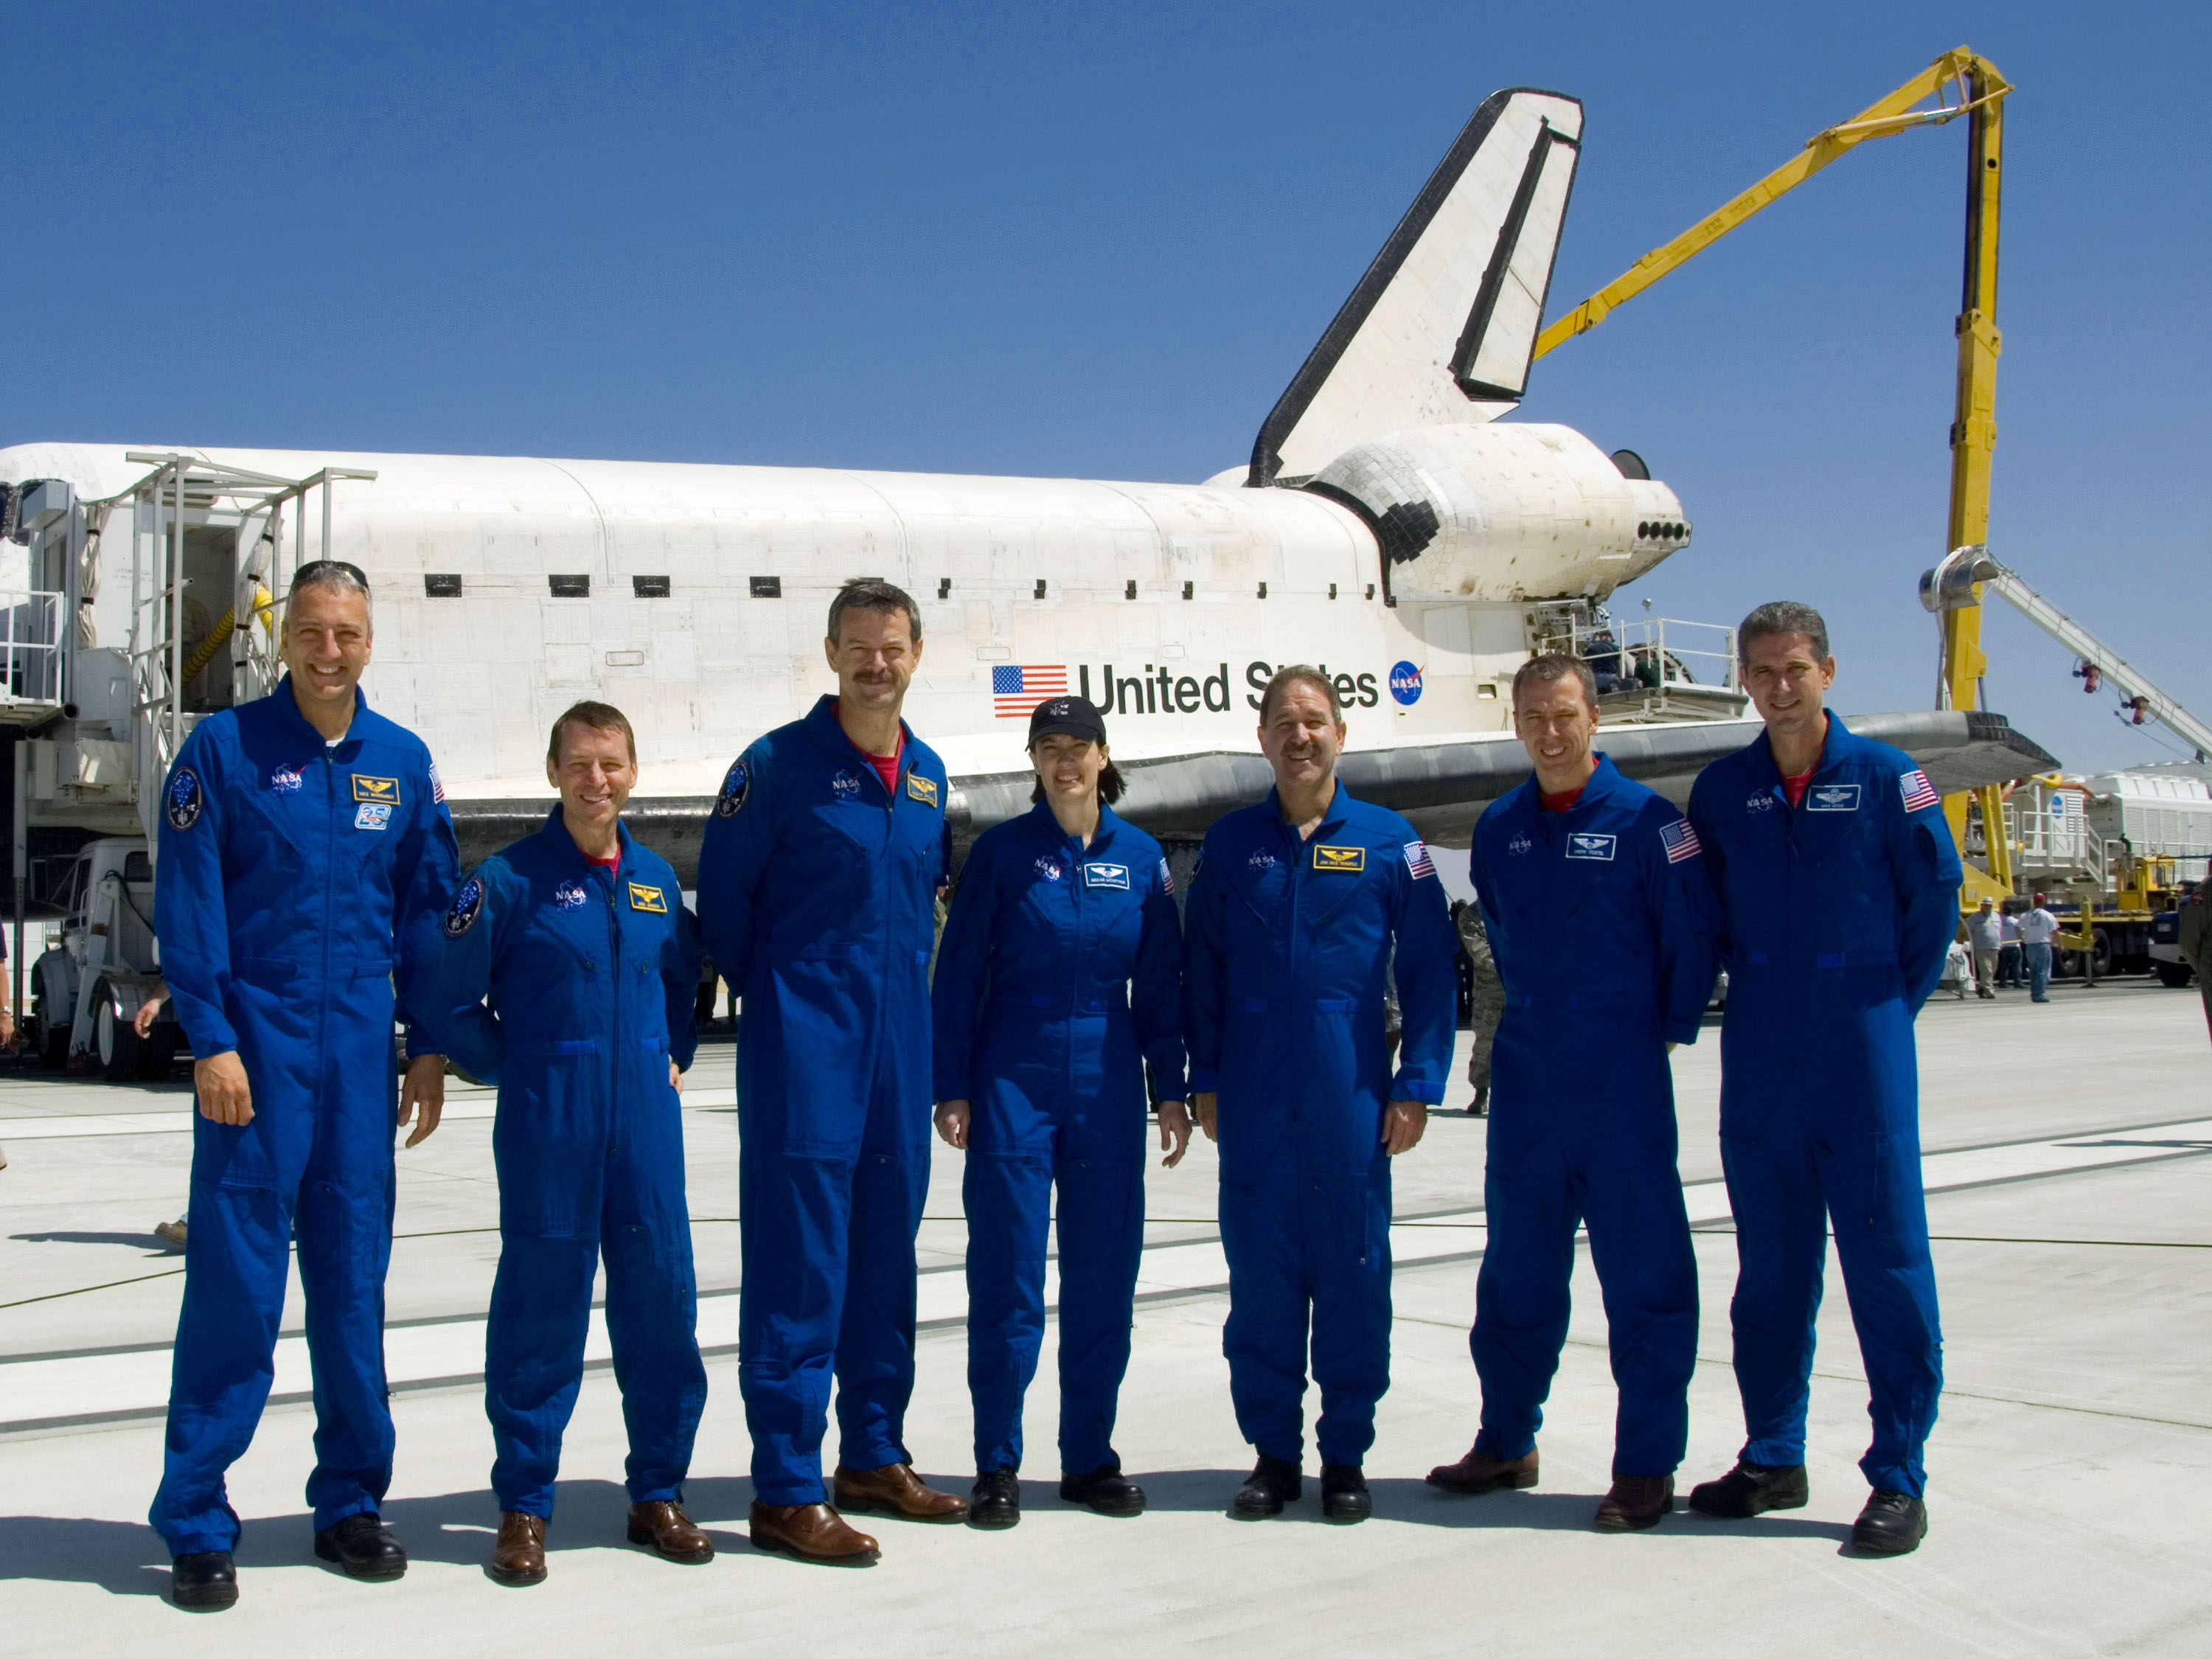 The STS-125 crew poses in front of Atlantis at Edwards after their successful mission